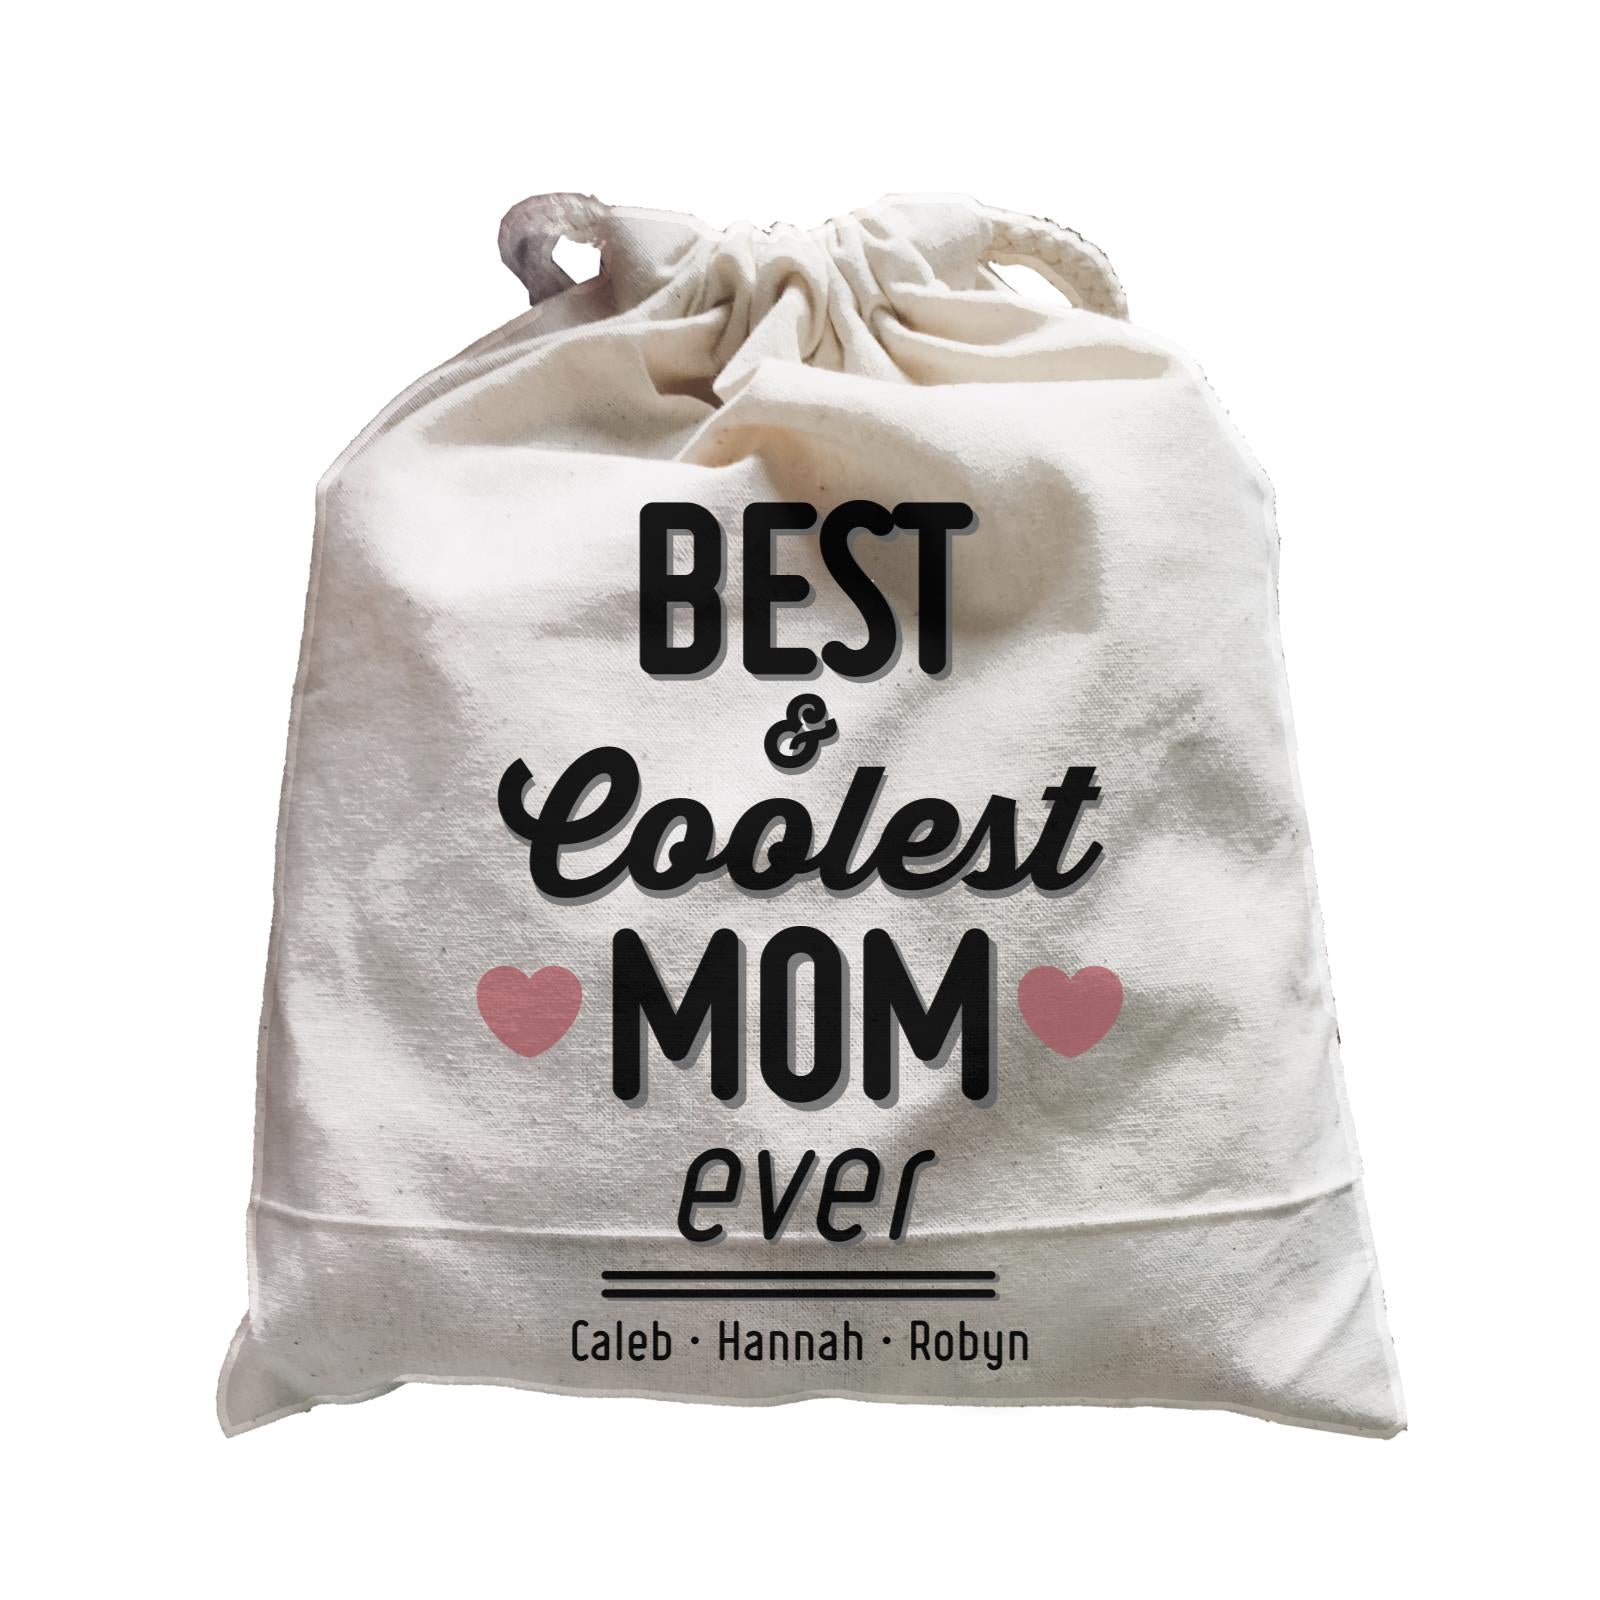 Best and Coolest Mom Ever Personalizable with Text Satchel